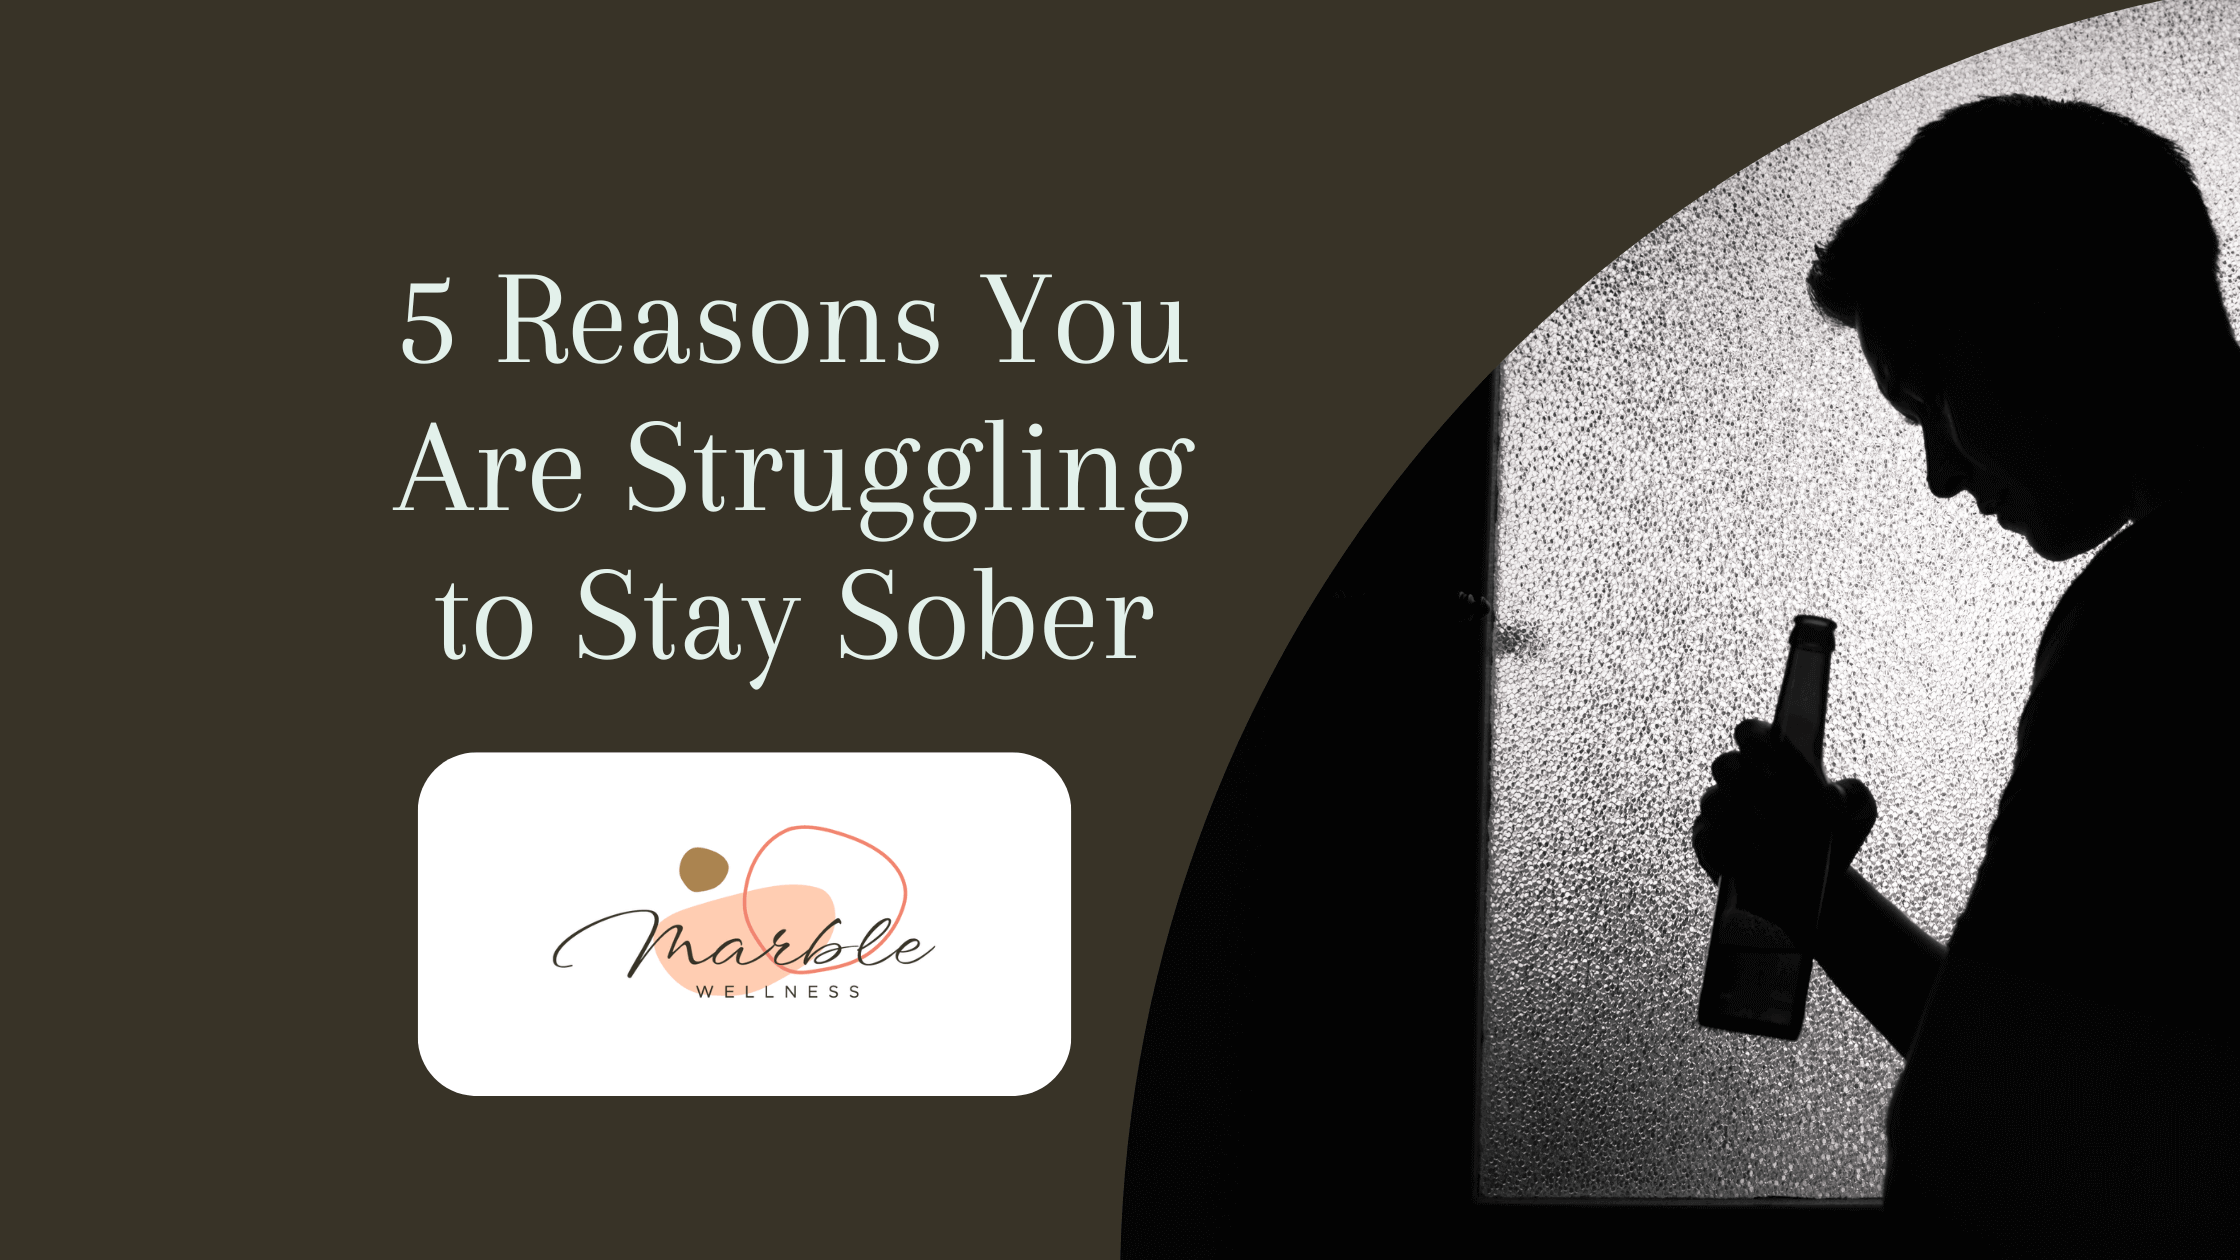 Blog cover for "5 Reasons You Are Struggling to Stay Sober" from a STL therapist for men, women, and families.